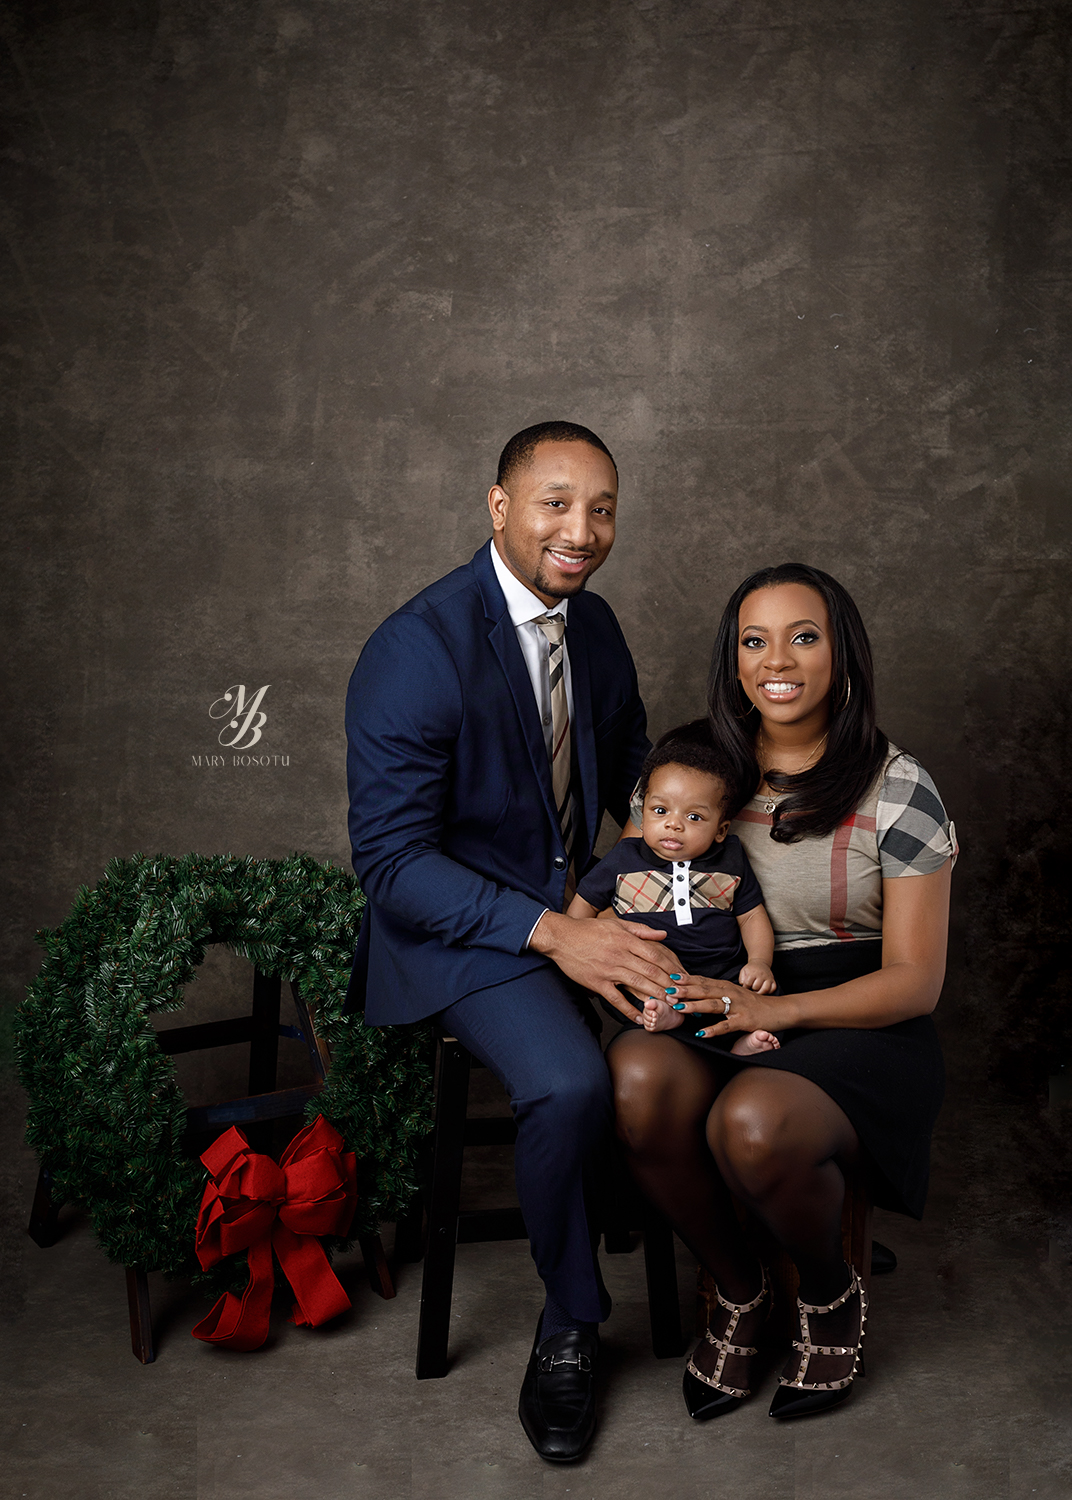 portrait photographer in baltimore maryland